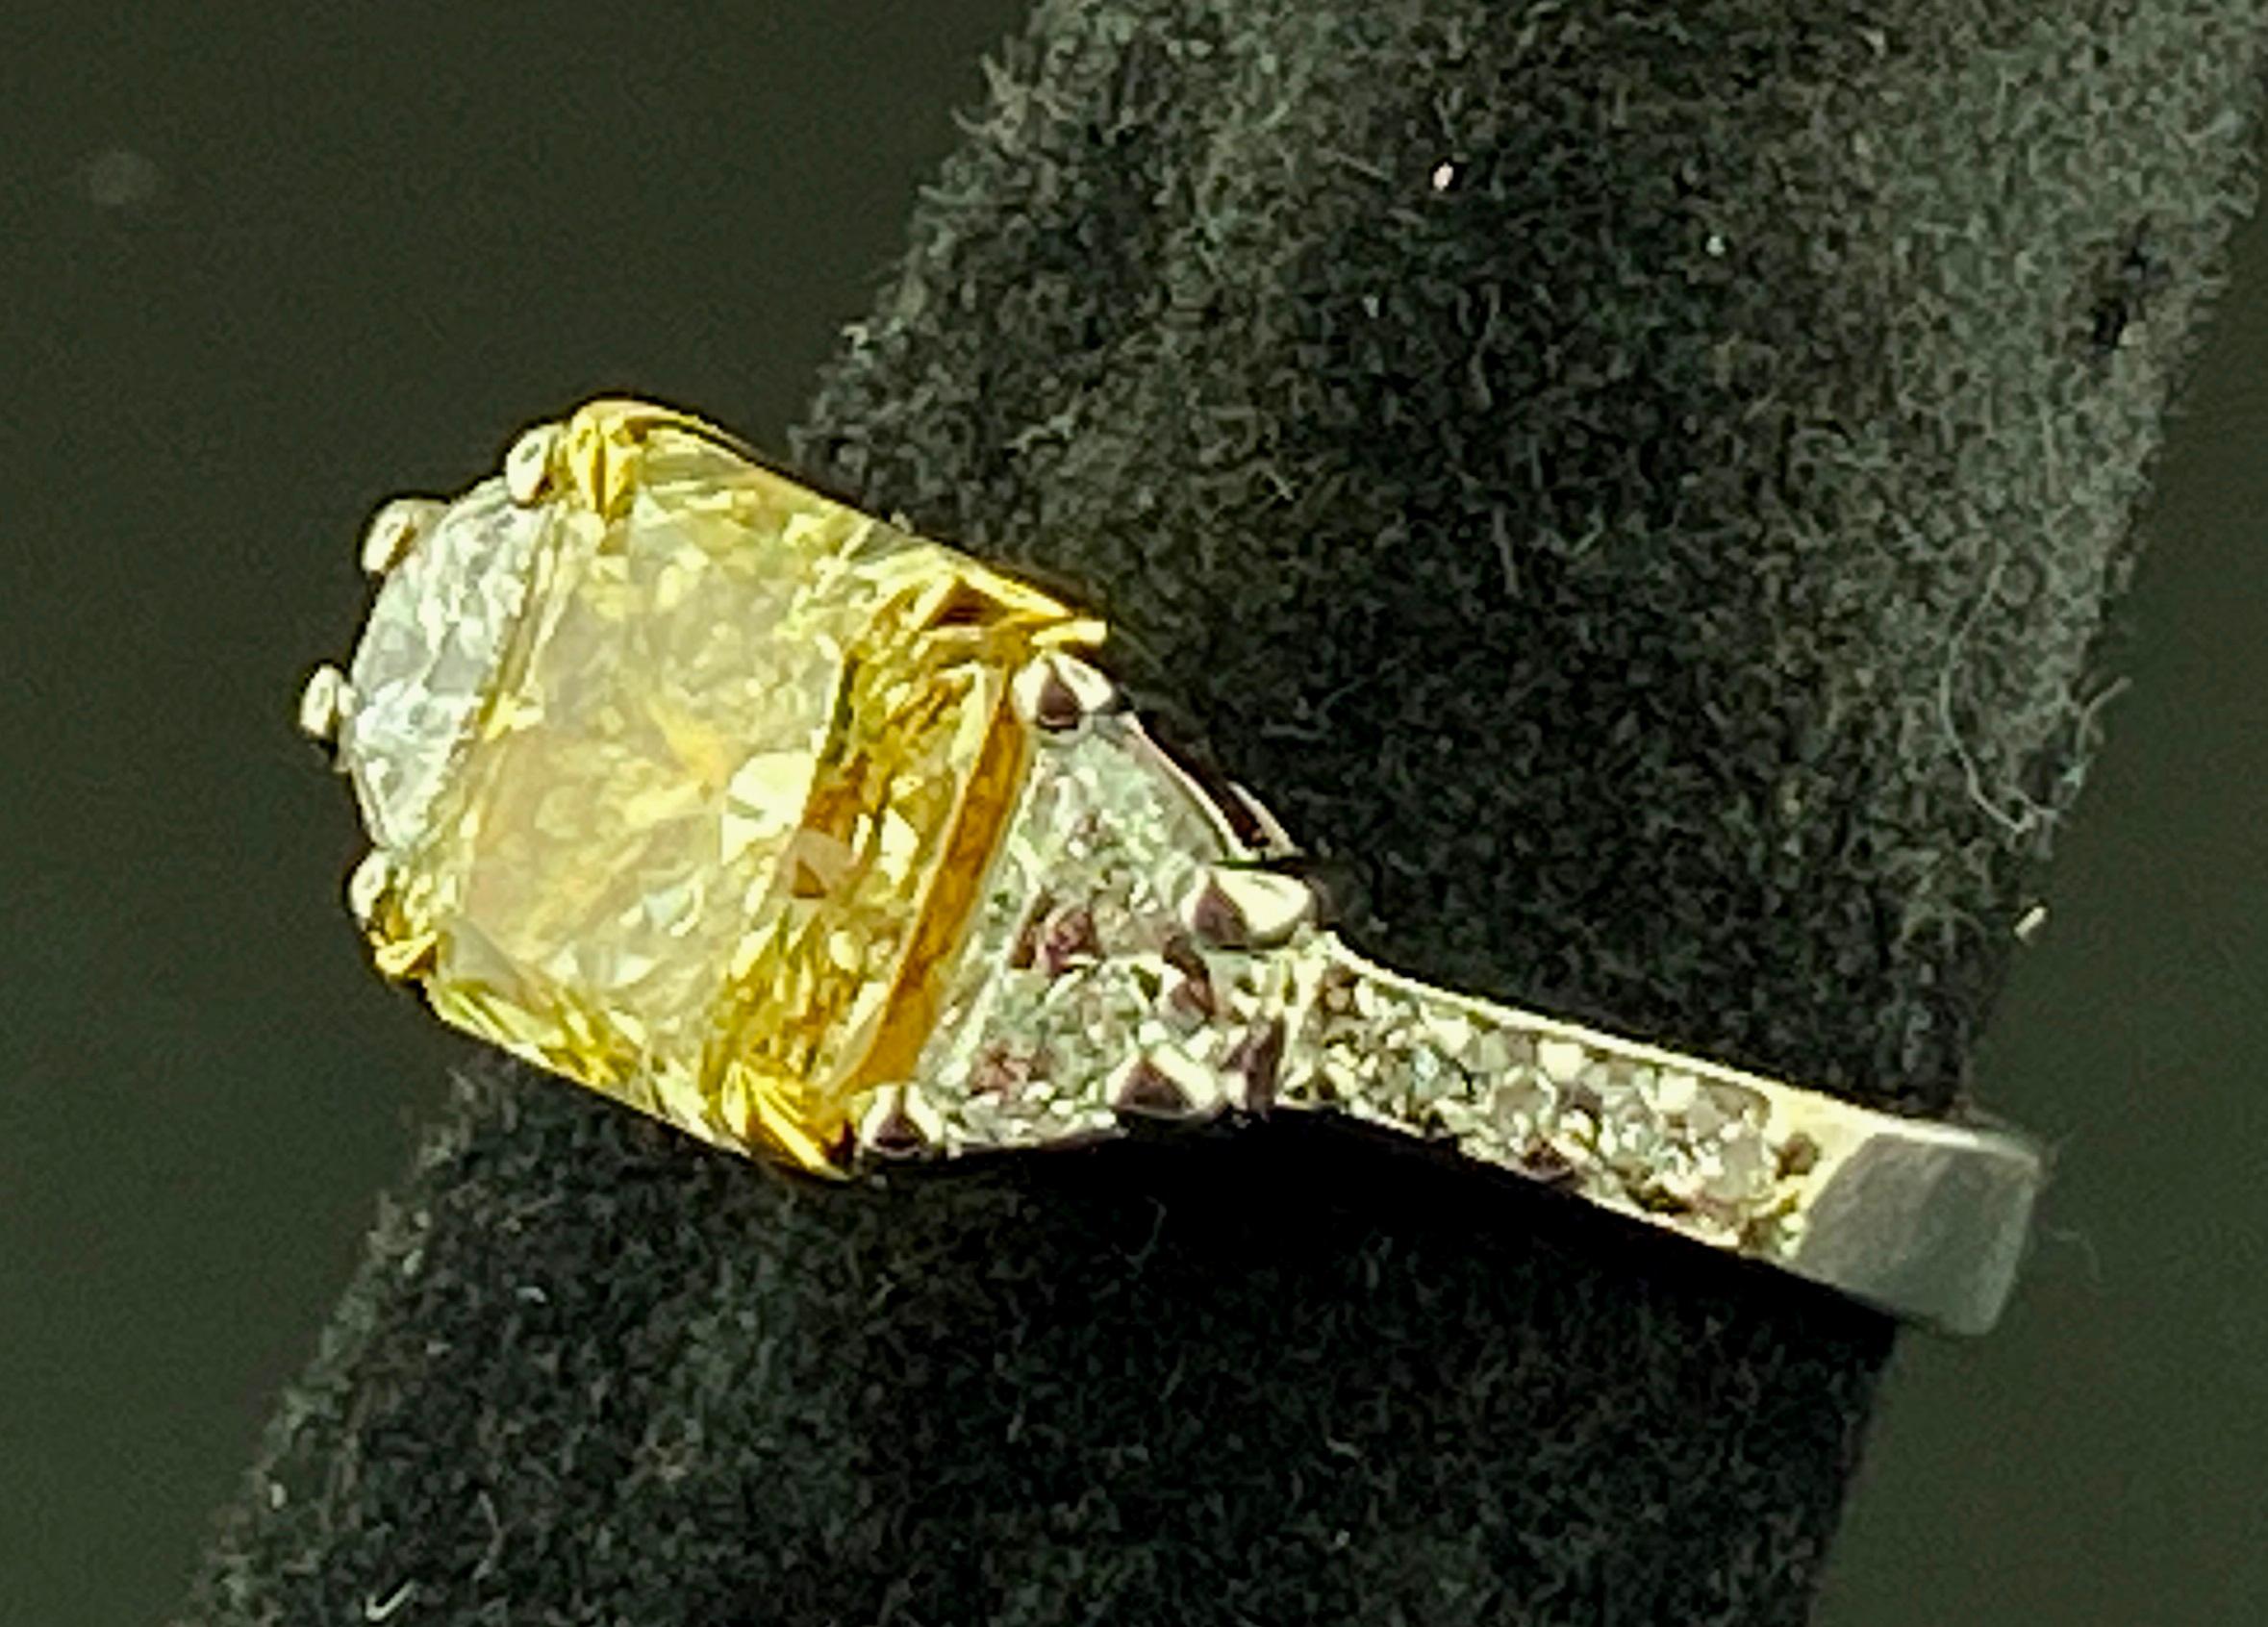 Set in 22 karat Yellow Gold and Platinum is a 1.82 carat Radiant Cut Fancy Yellow Diamond, Clarity VS with two Half-Moon cut diamonds on the side with a total weight of 0.70 carats, Color: H, Clarity: 
VS - SI.  Mounting includes 10 Round Brilliant